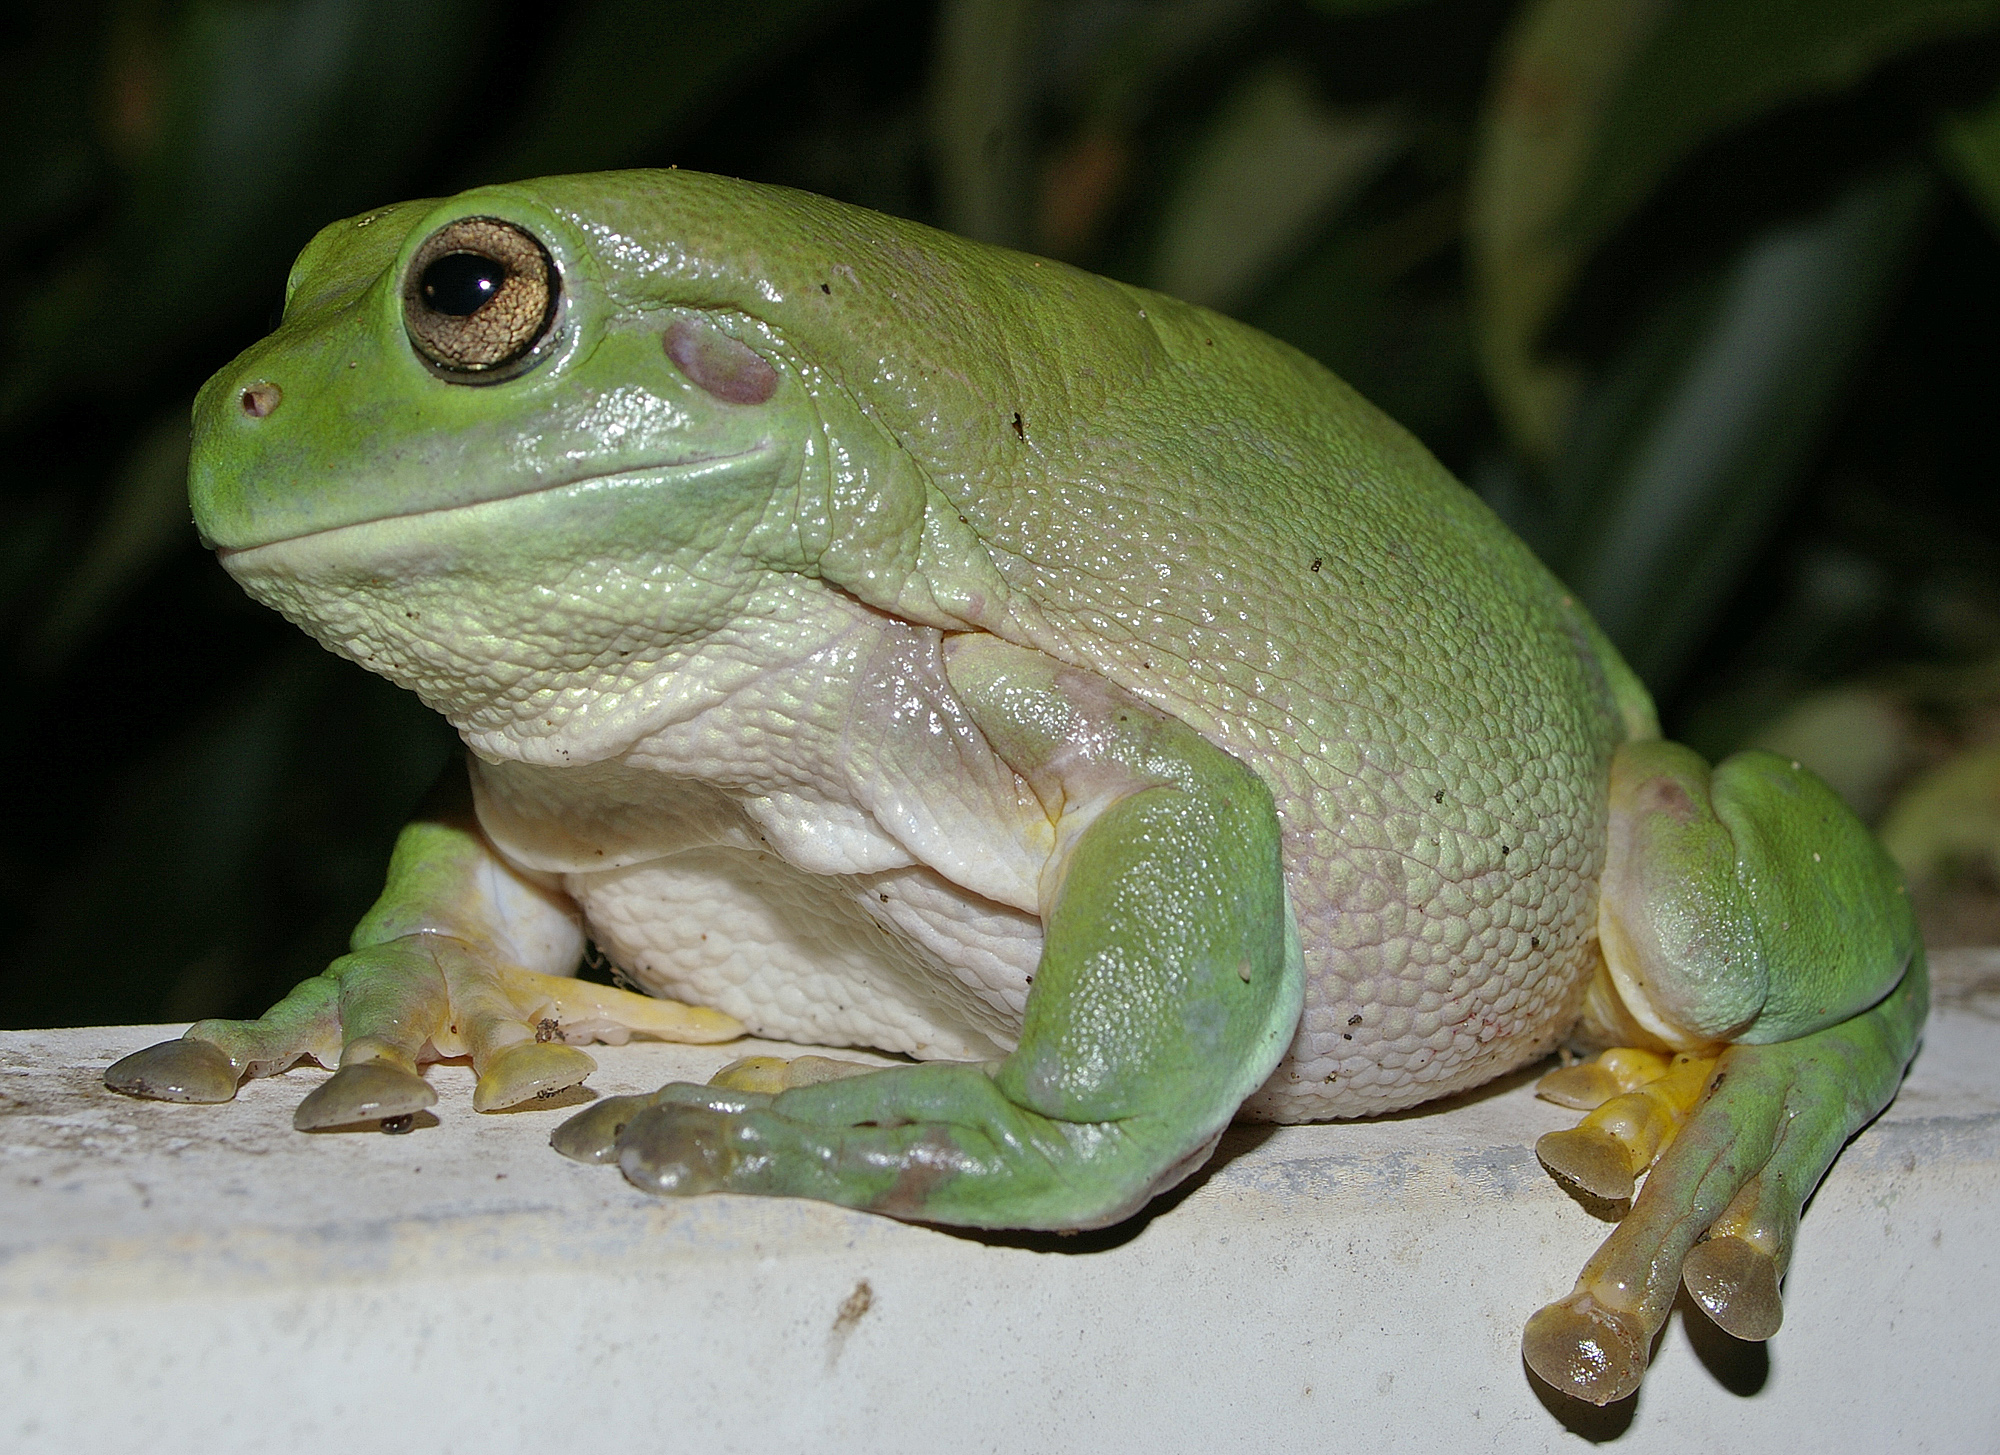 what is the sticky stuff on a frogs tongue and how does it help catch prey